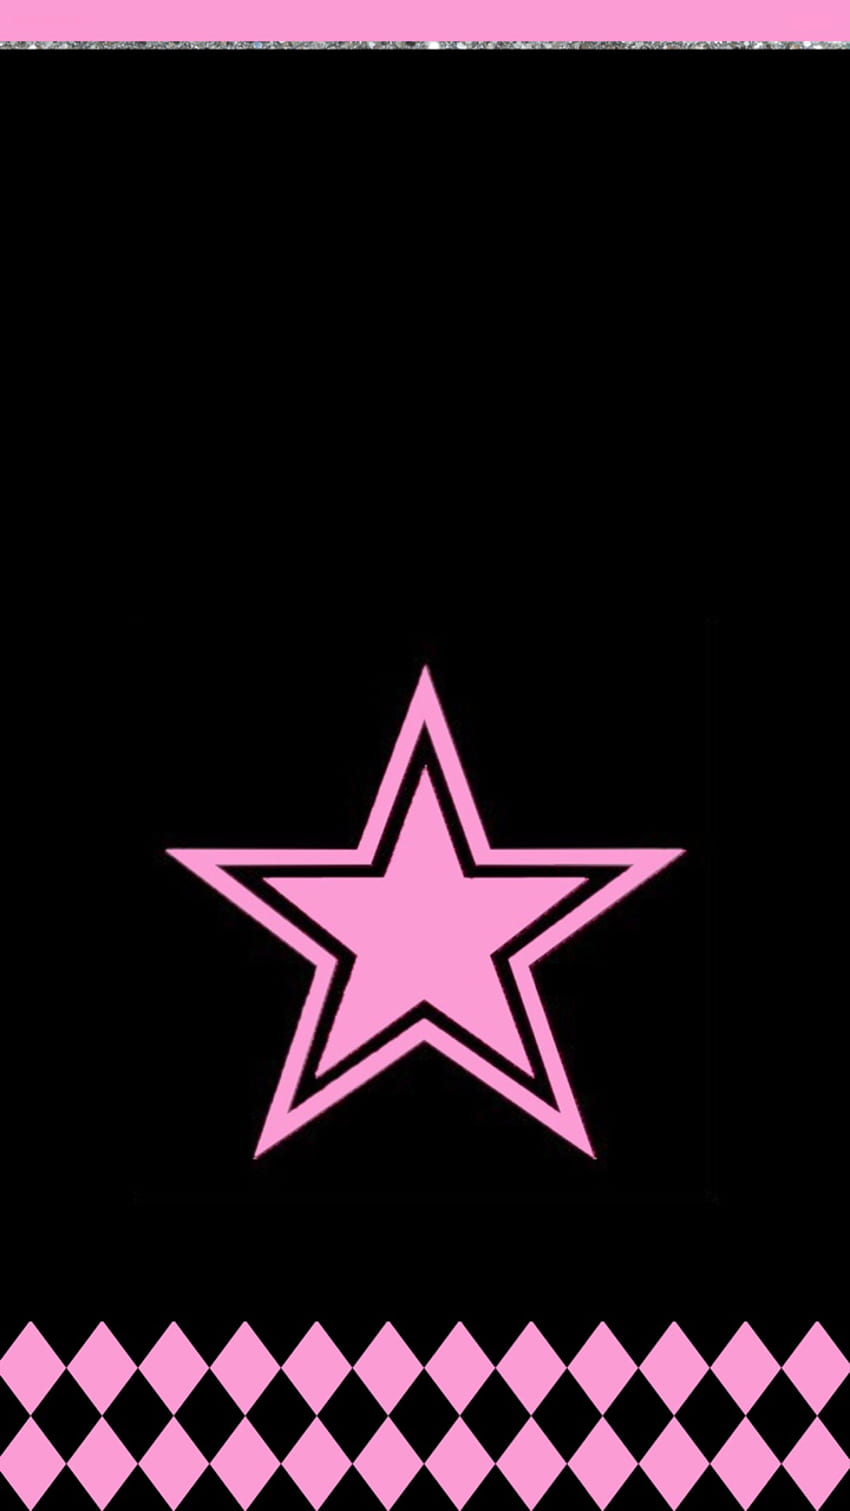 Dallas Cowboys Pink Star Dallas Fathead Nfl Logo Wall Decal Nfl Team Dallas  Cowboys PNG Image With Transparent Background  TOPpng